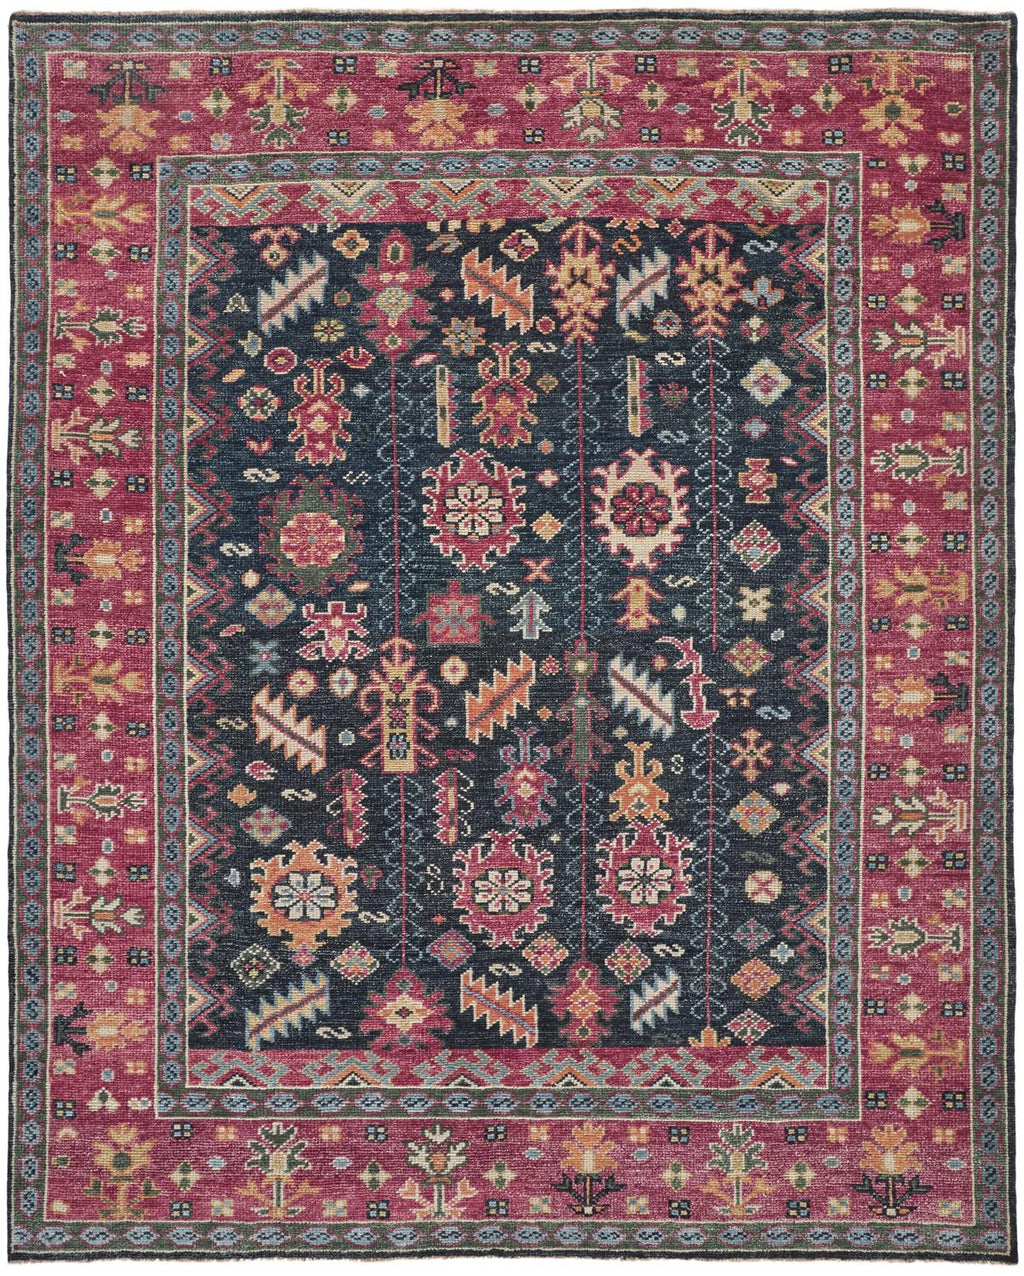 9' X 12' Pink Blue And Orange Wool Floral Hand Knotted Distressed Stain Resistant Area Rug With Fringe